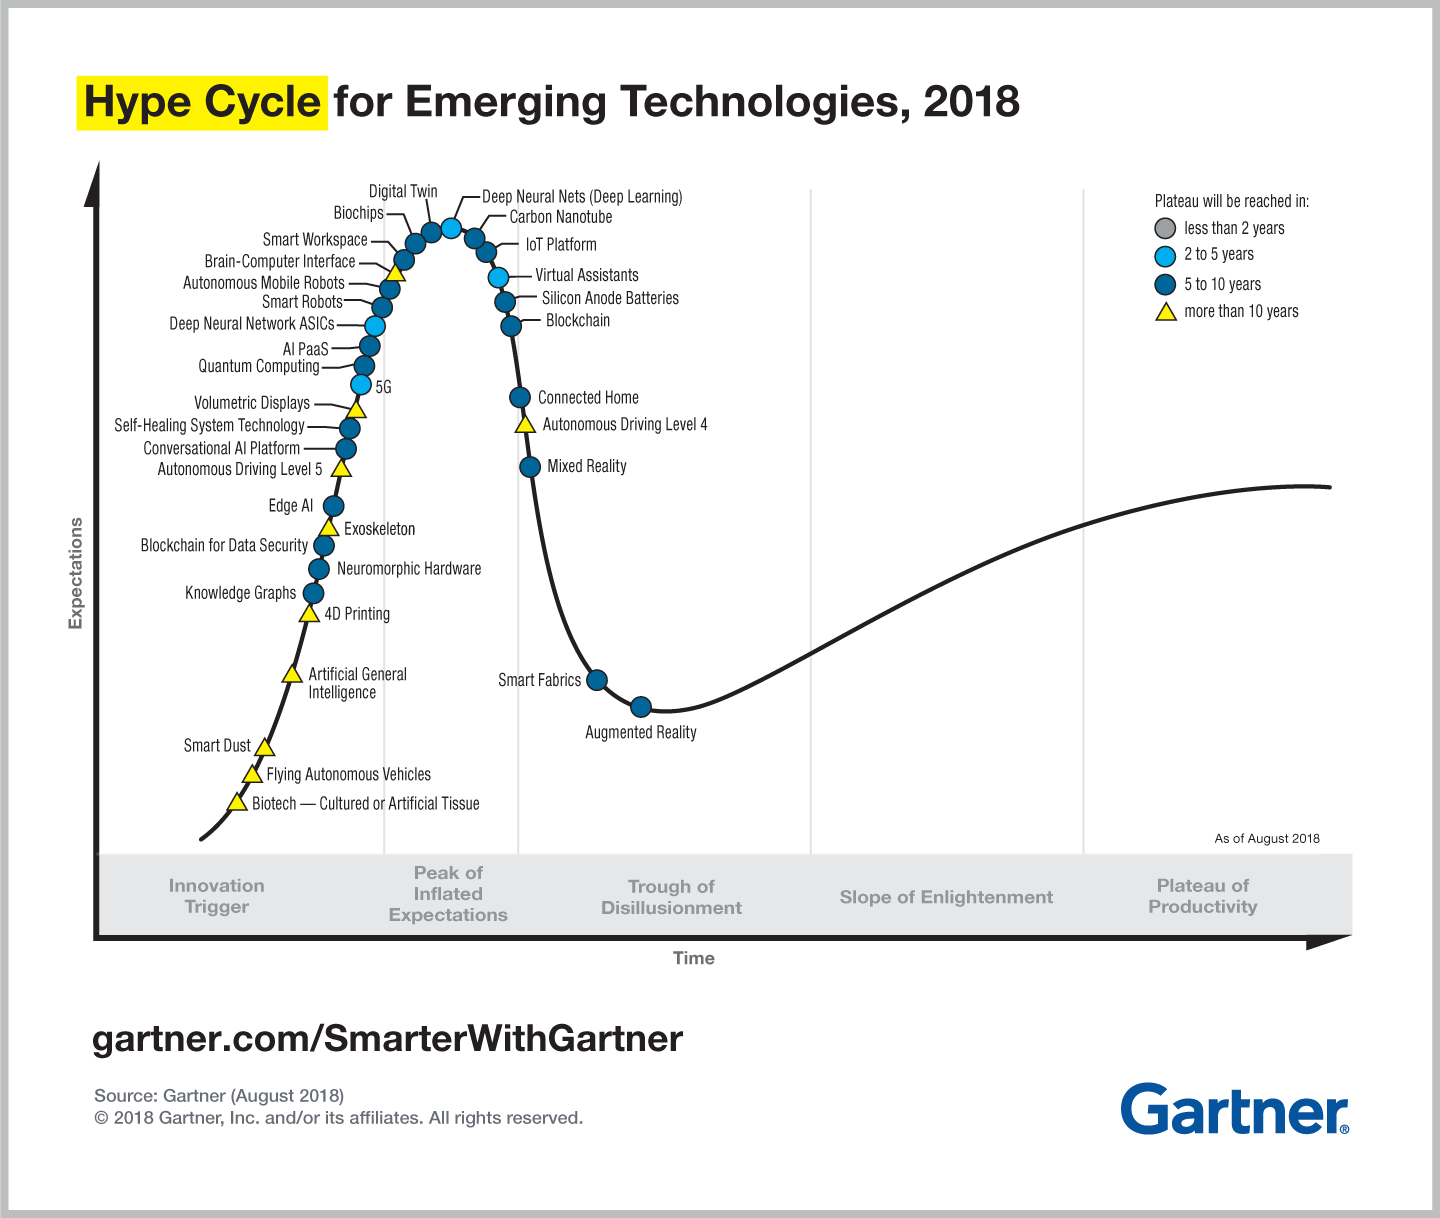 Hype Cycle 2018